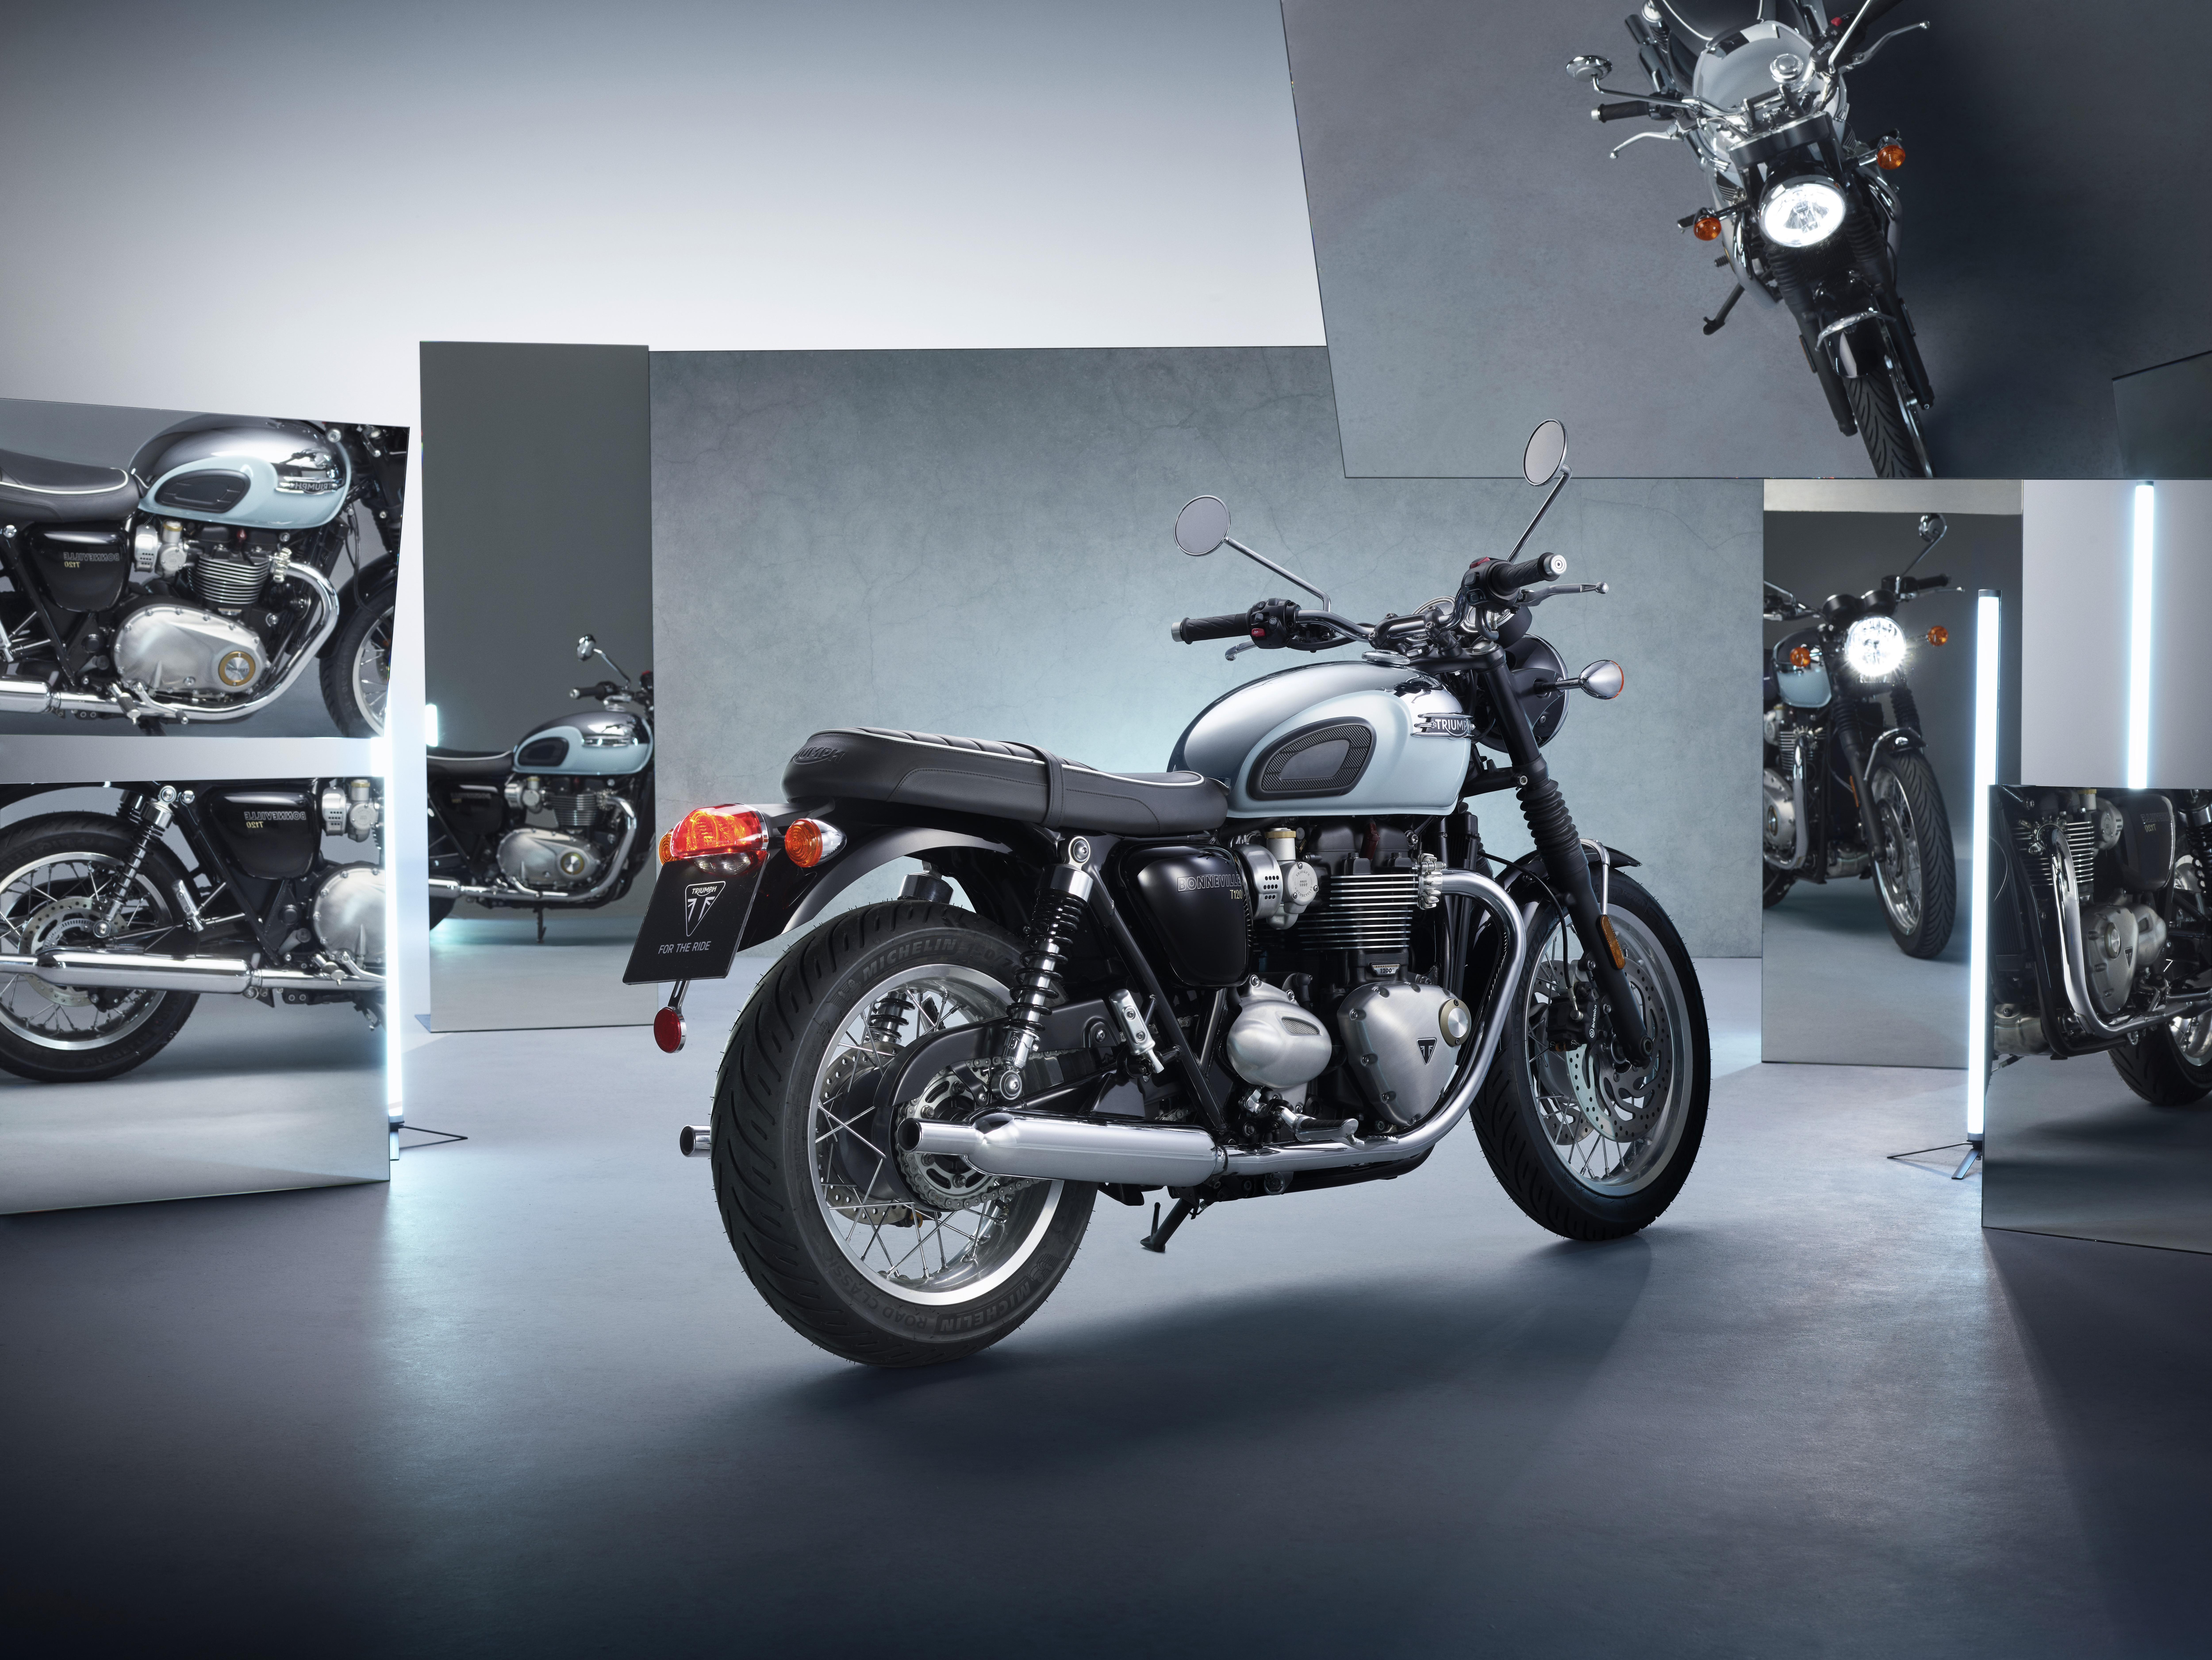 HD desktop wallpaper featuring a Triumph Bonneville T120R Chrome Edition motorcycle showcased in a stylish studio environment with reflections of the bike on surrounding surfaces.